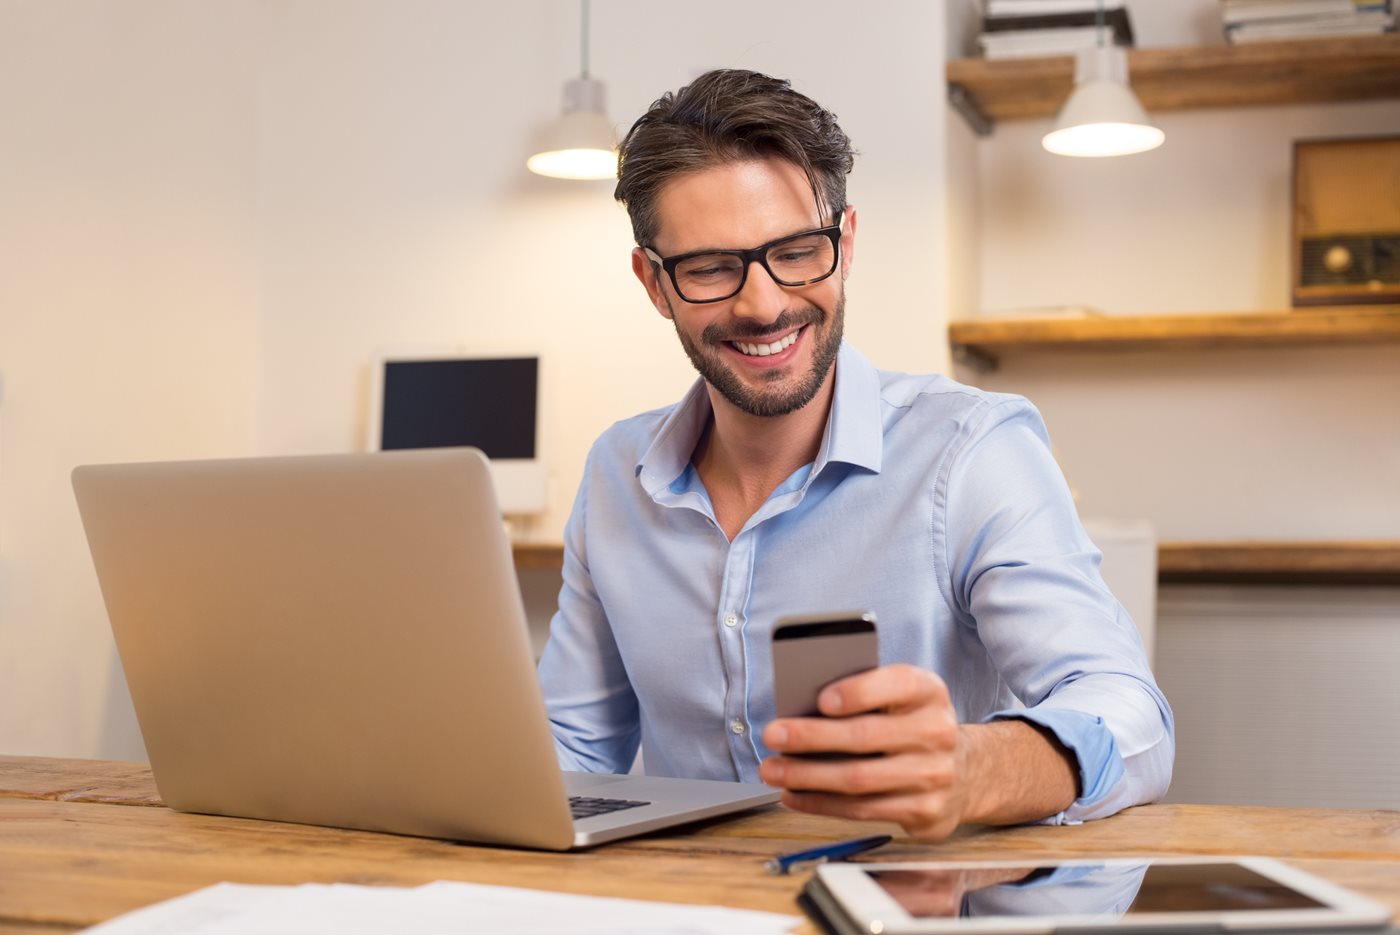 A businessman sits in front of a laptop and smiles while looking at his mobile device